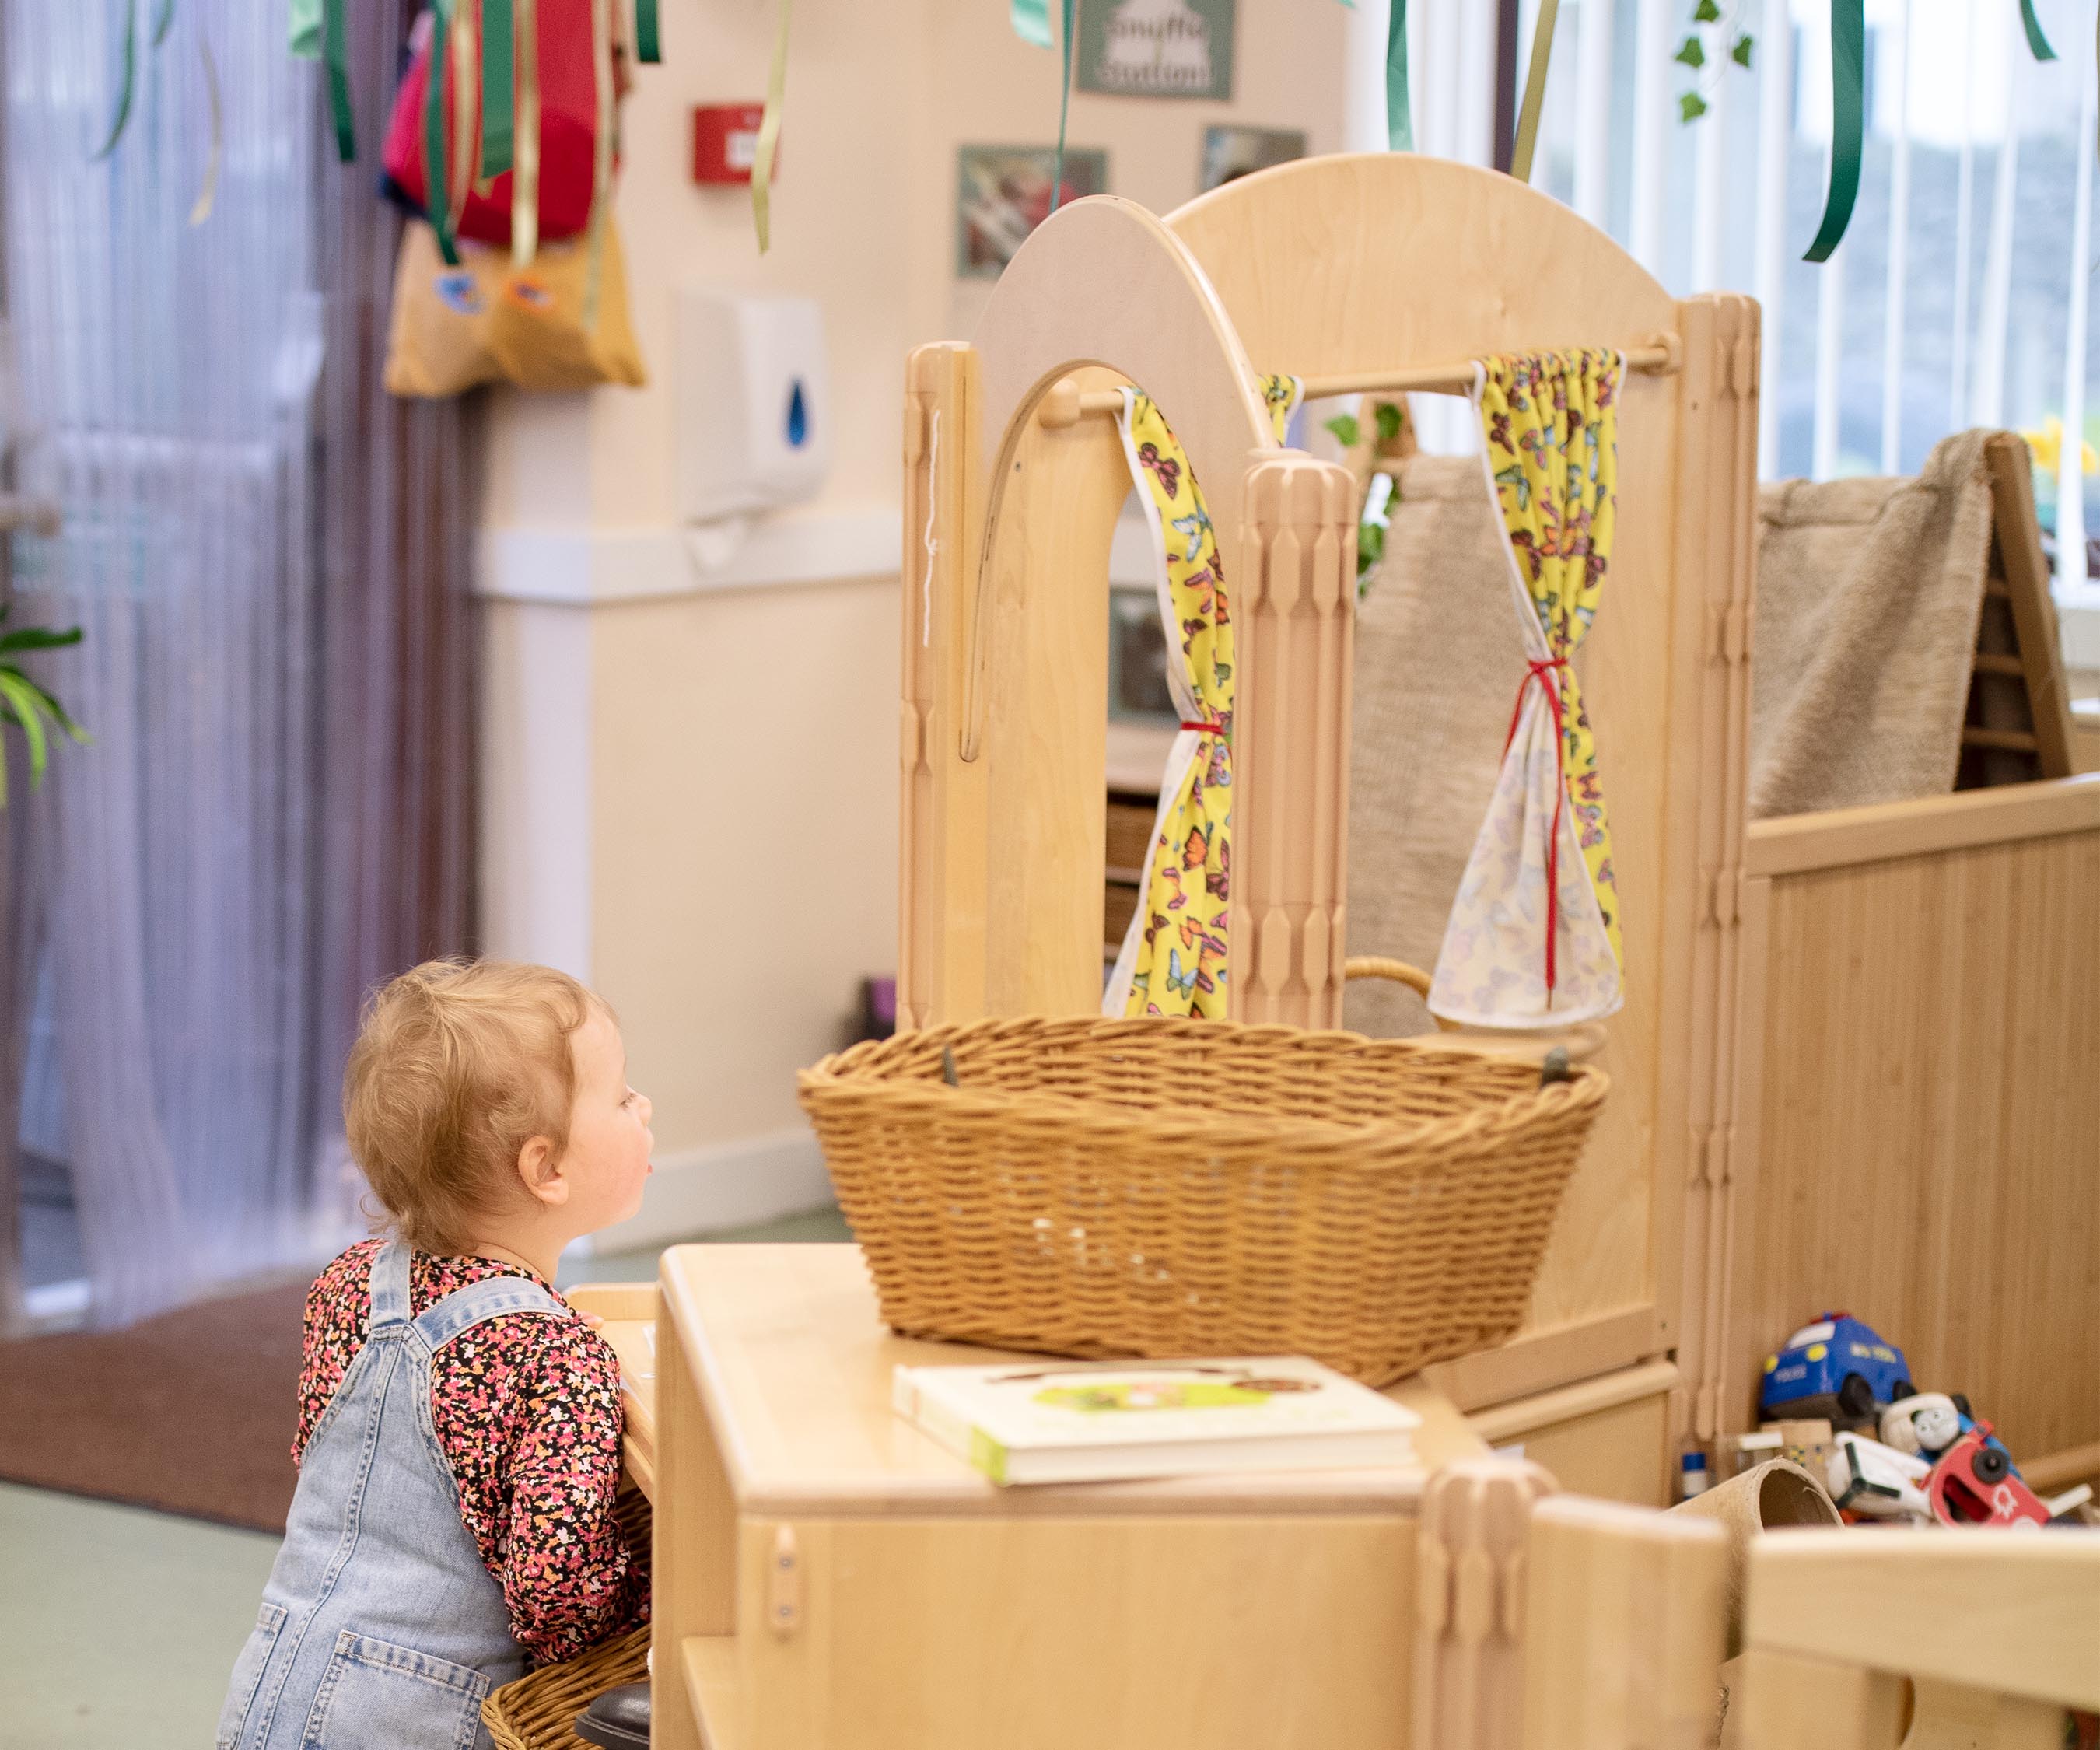 toddler girl wearing overalls standing in nursery classroom set up with solid wood furniture